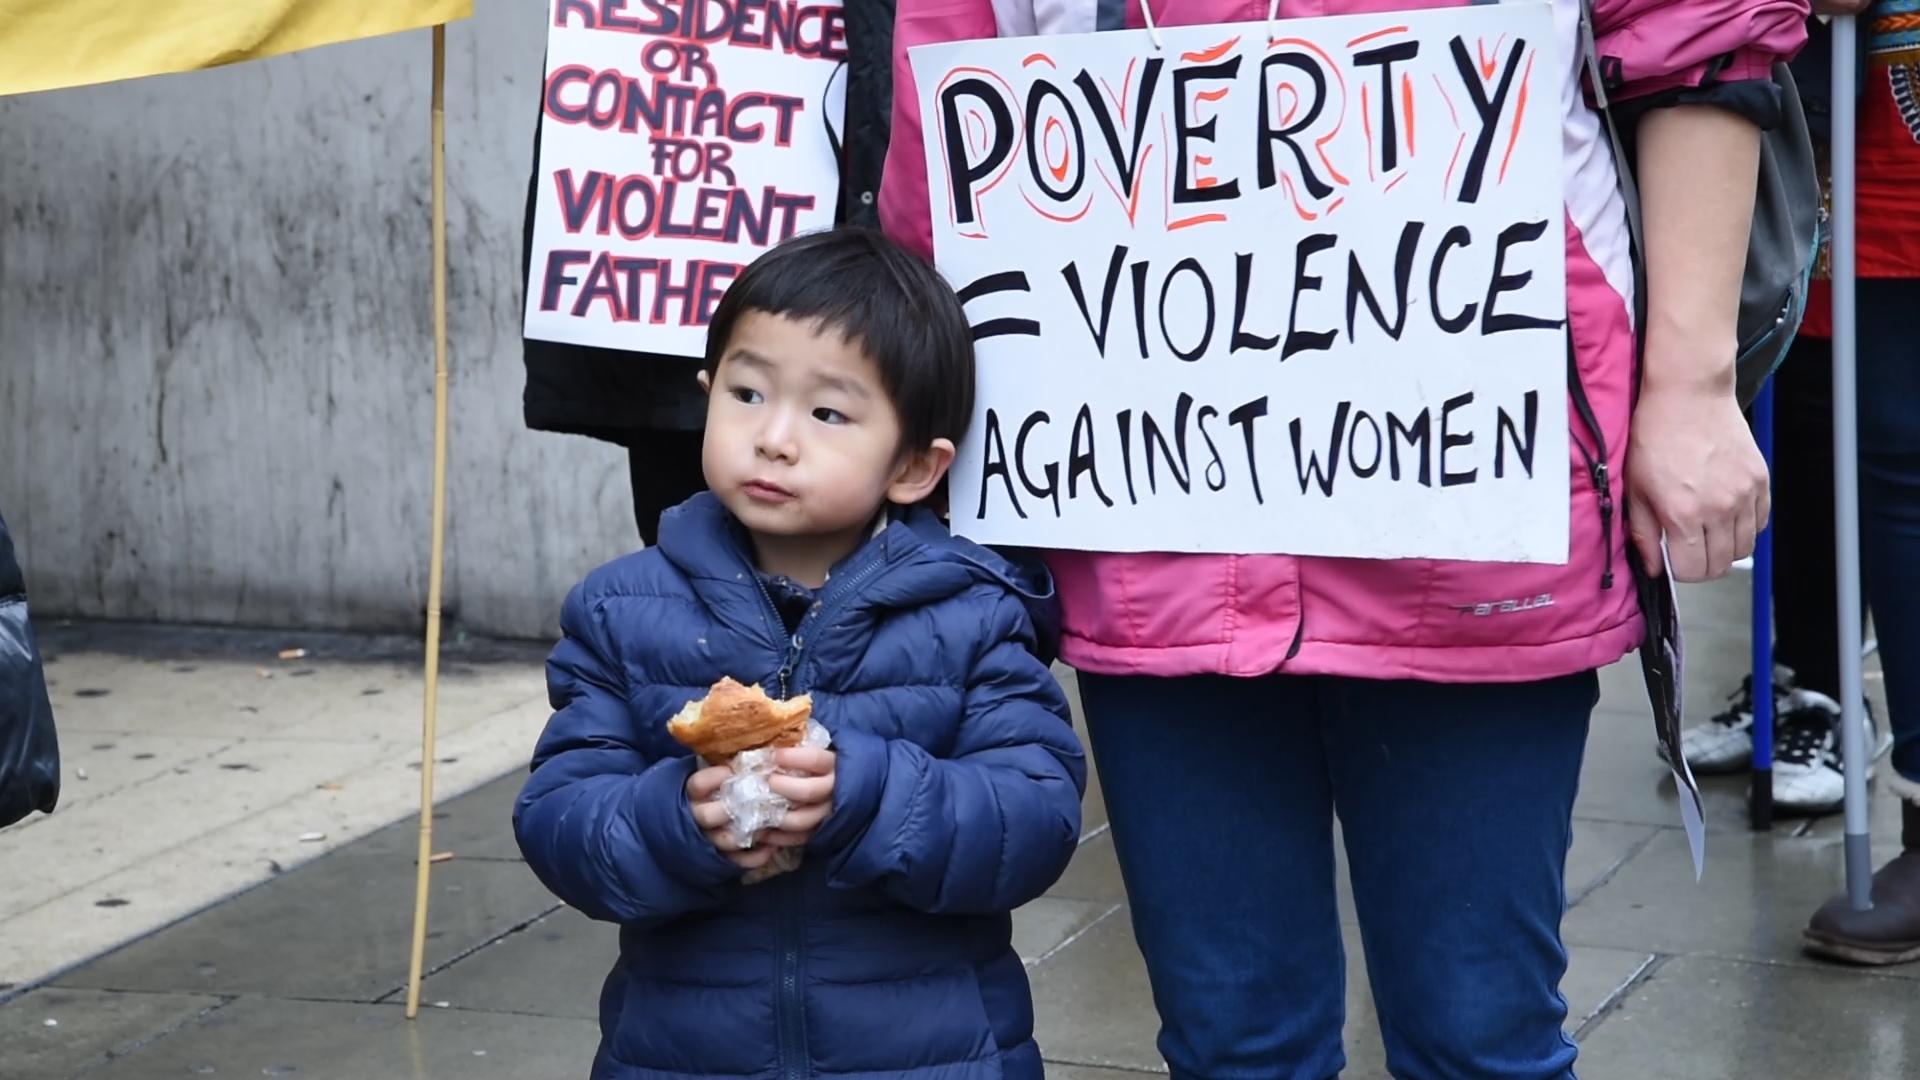 Little boy has a snack while at the protest with his mother